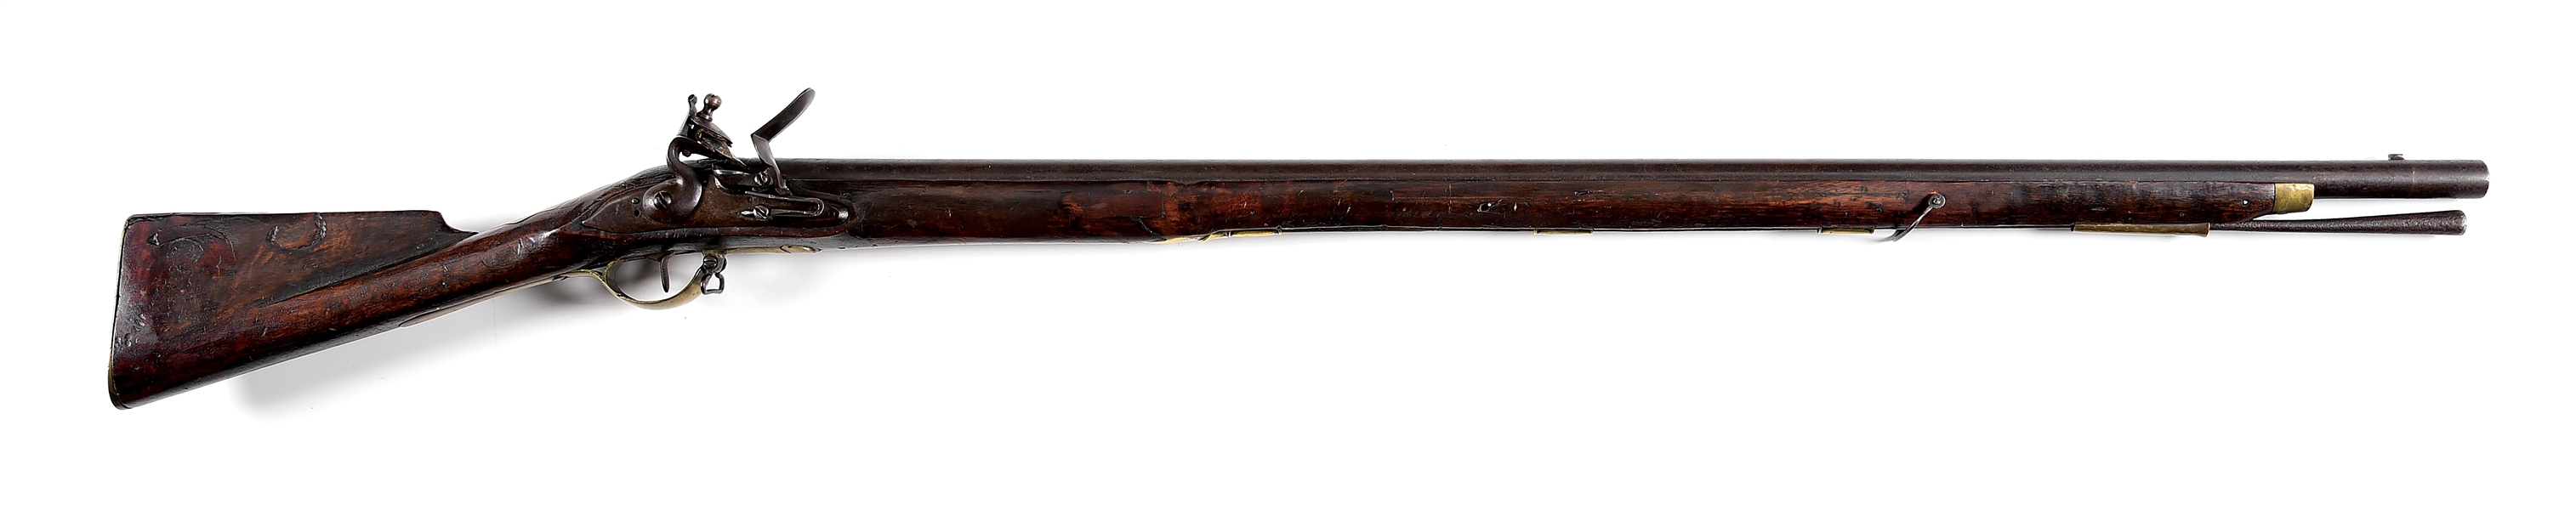 (A) MARYLAND COMMITTEE OF SAFETY TYPE FLINTLOCK MUSKET MARKED "SS" ATTRIBUTED TO SAMUEL SMITH.